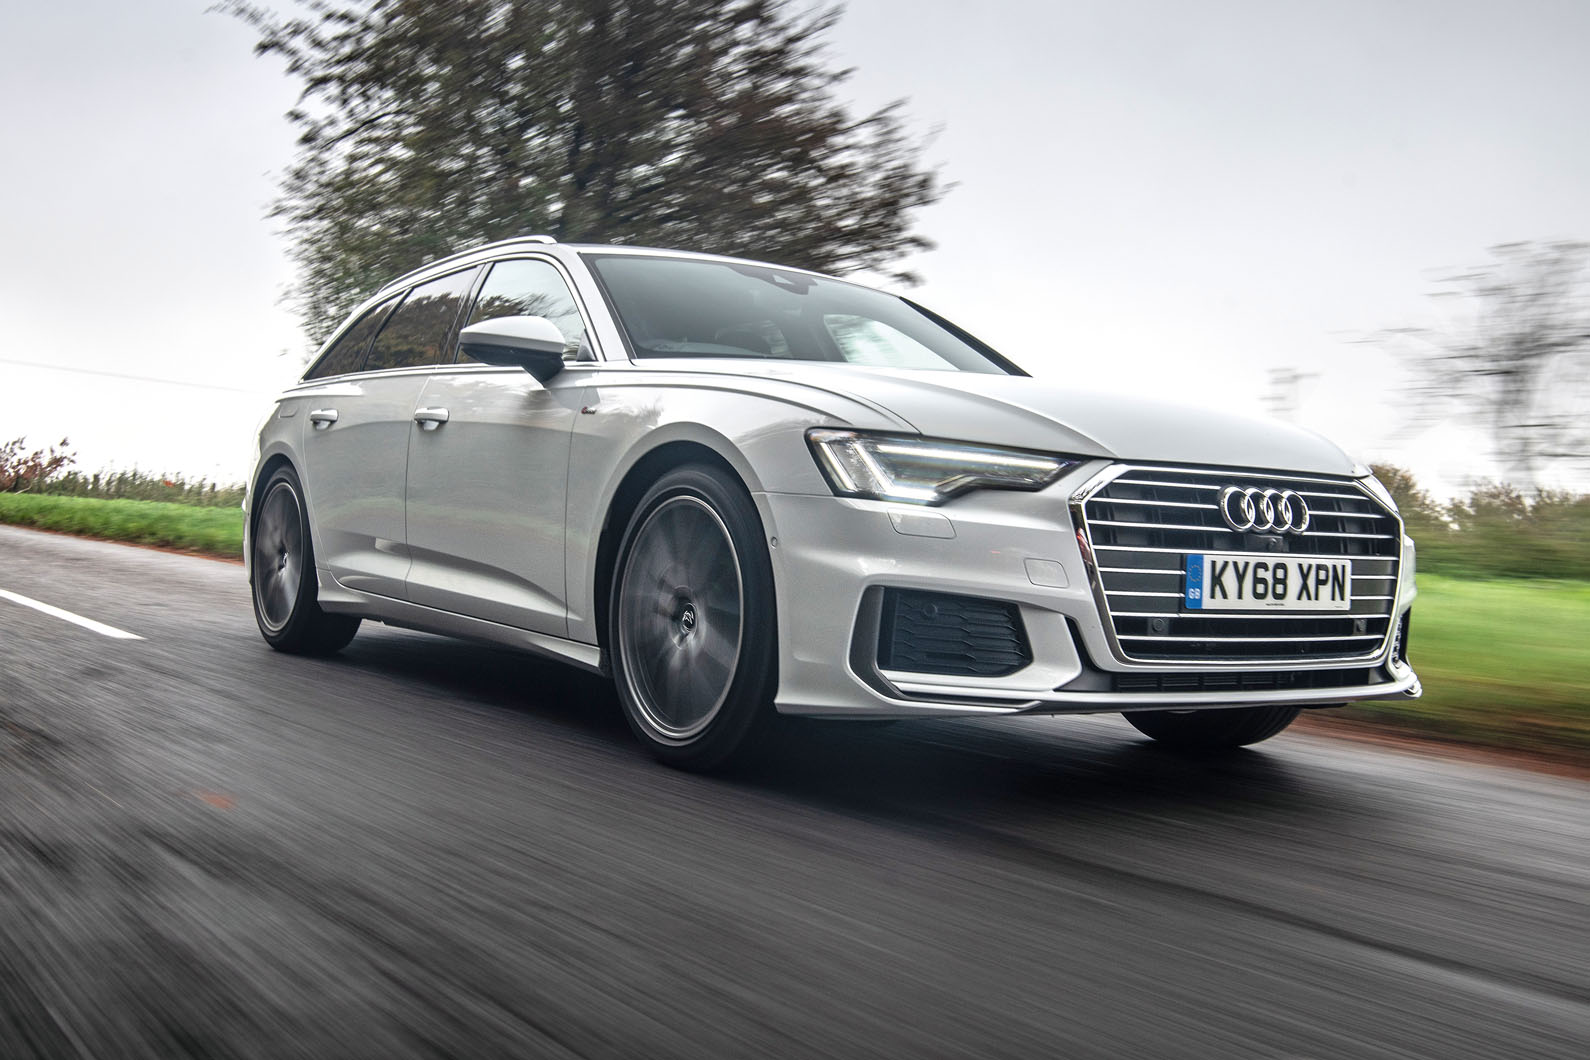 Audi A6 Avant 2018 road test review - on the road angle